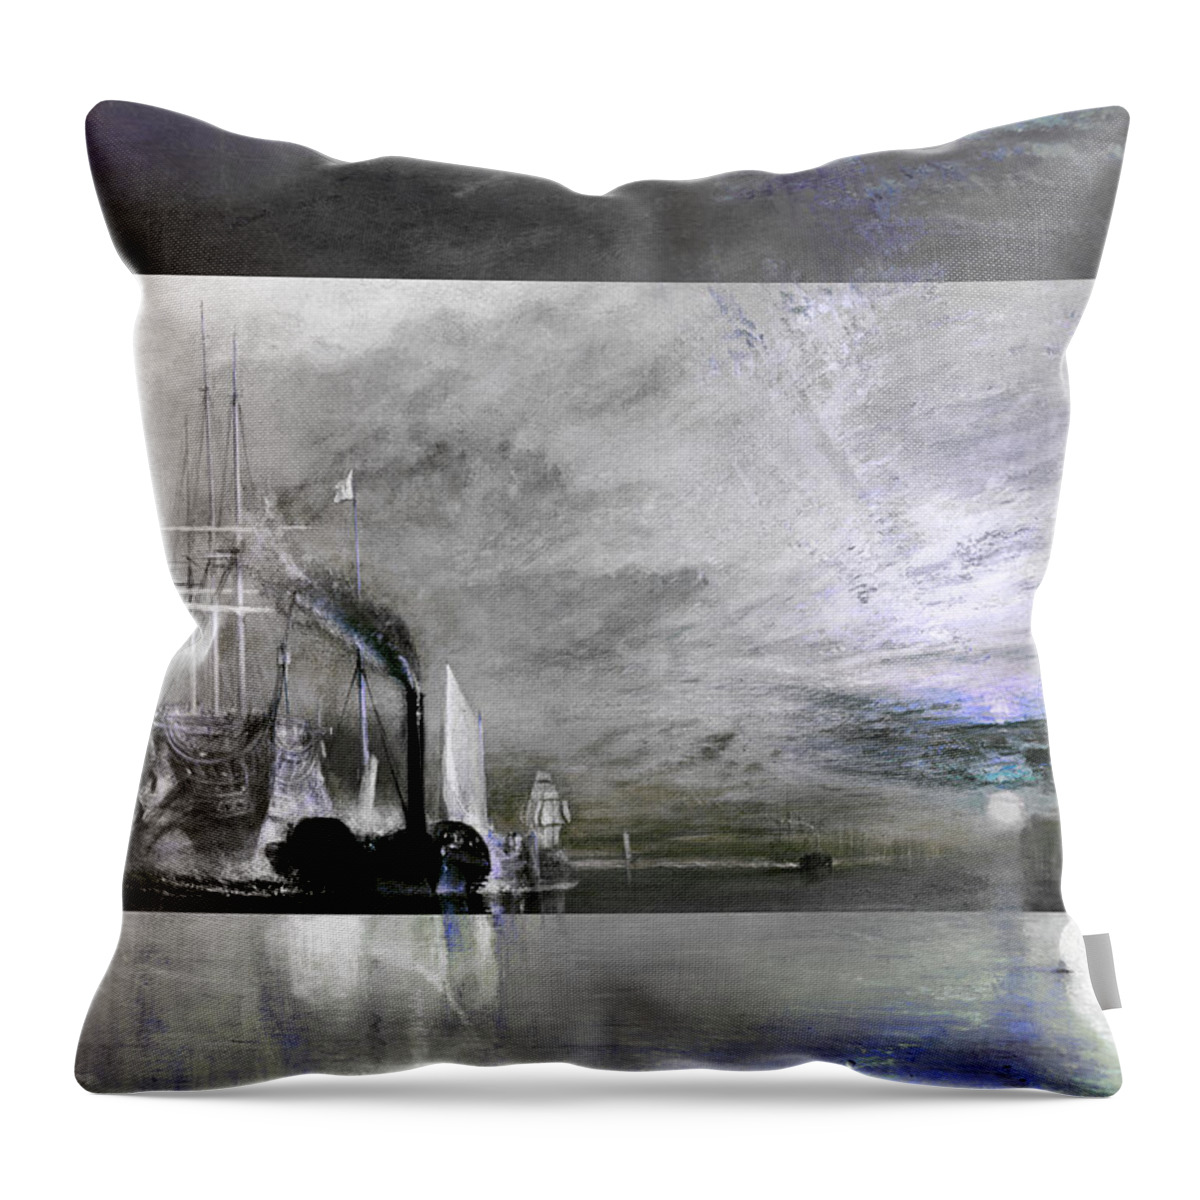 Abstract In The Living Room Throw Pillow featuring the digital art Layered 11 Turner by David Bridburg